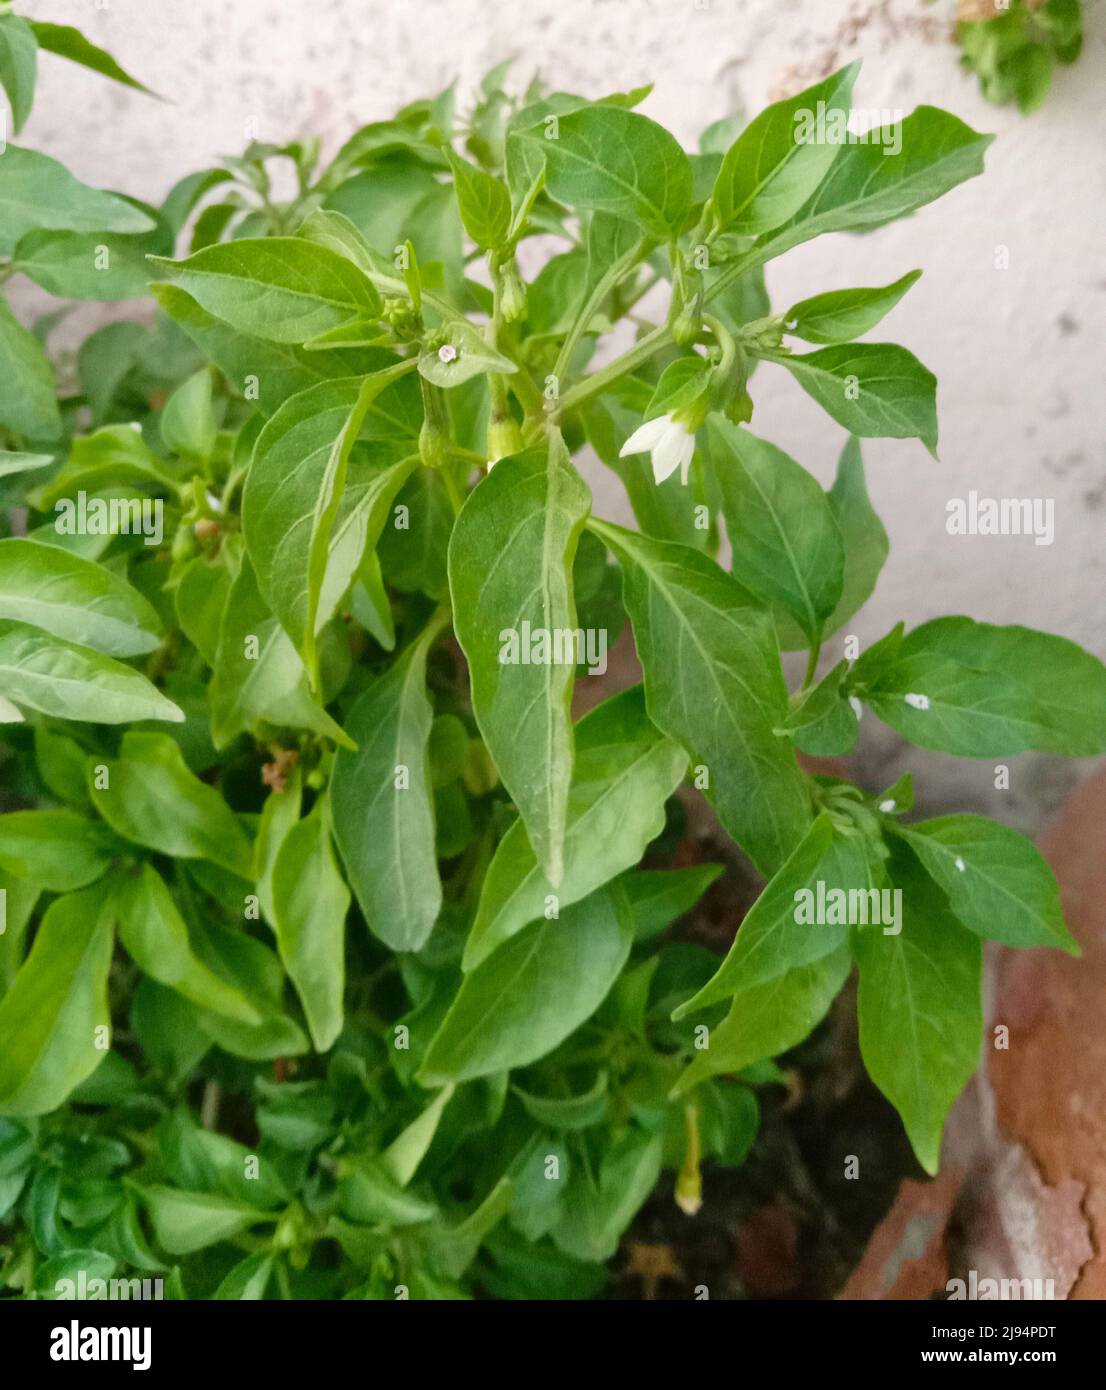 green chilli or Capsicum frutescens plant leaves Stock Photo